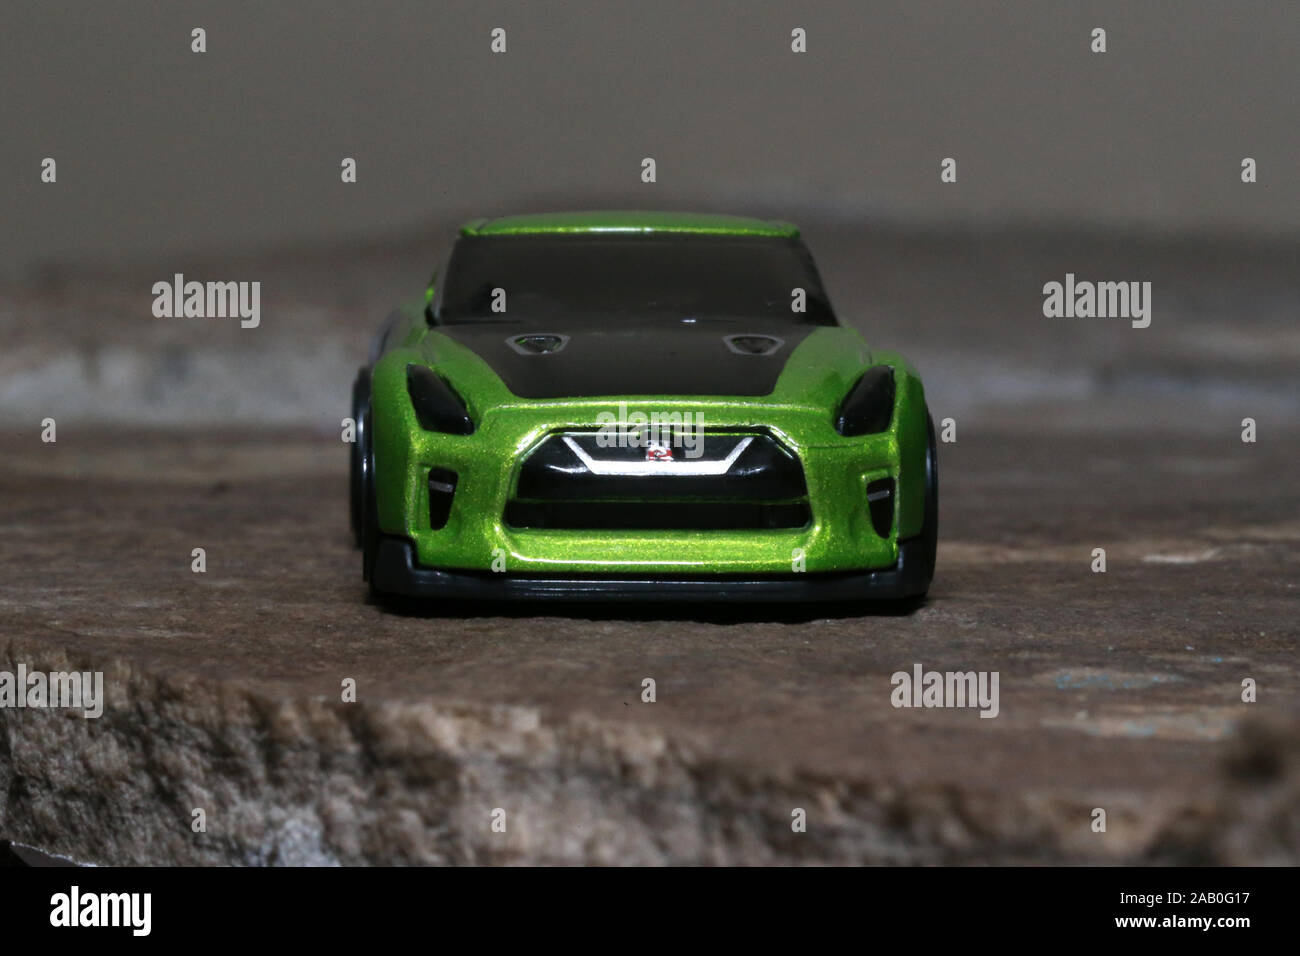 Famous Youtuber Tanner Fox best known as TFOX had his 2017 Nissan GTR made  in to a Hot Wheels car, Tanner has named his Youtube famous car Guaczilla  Stock Photo - Alamy